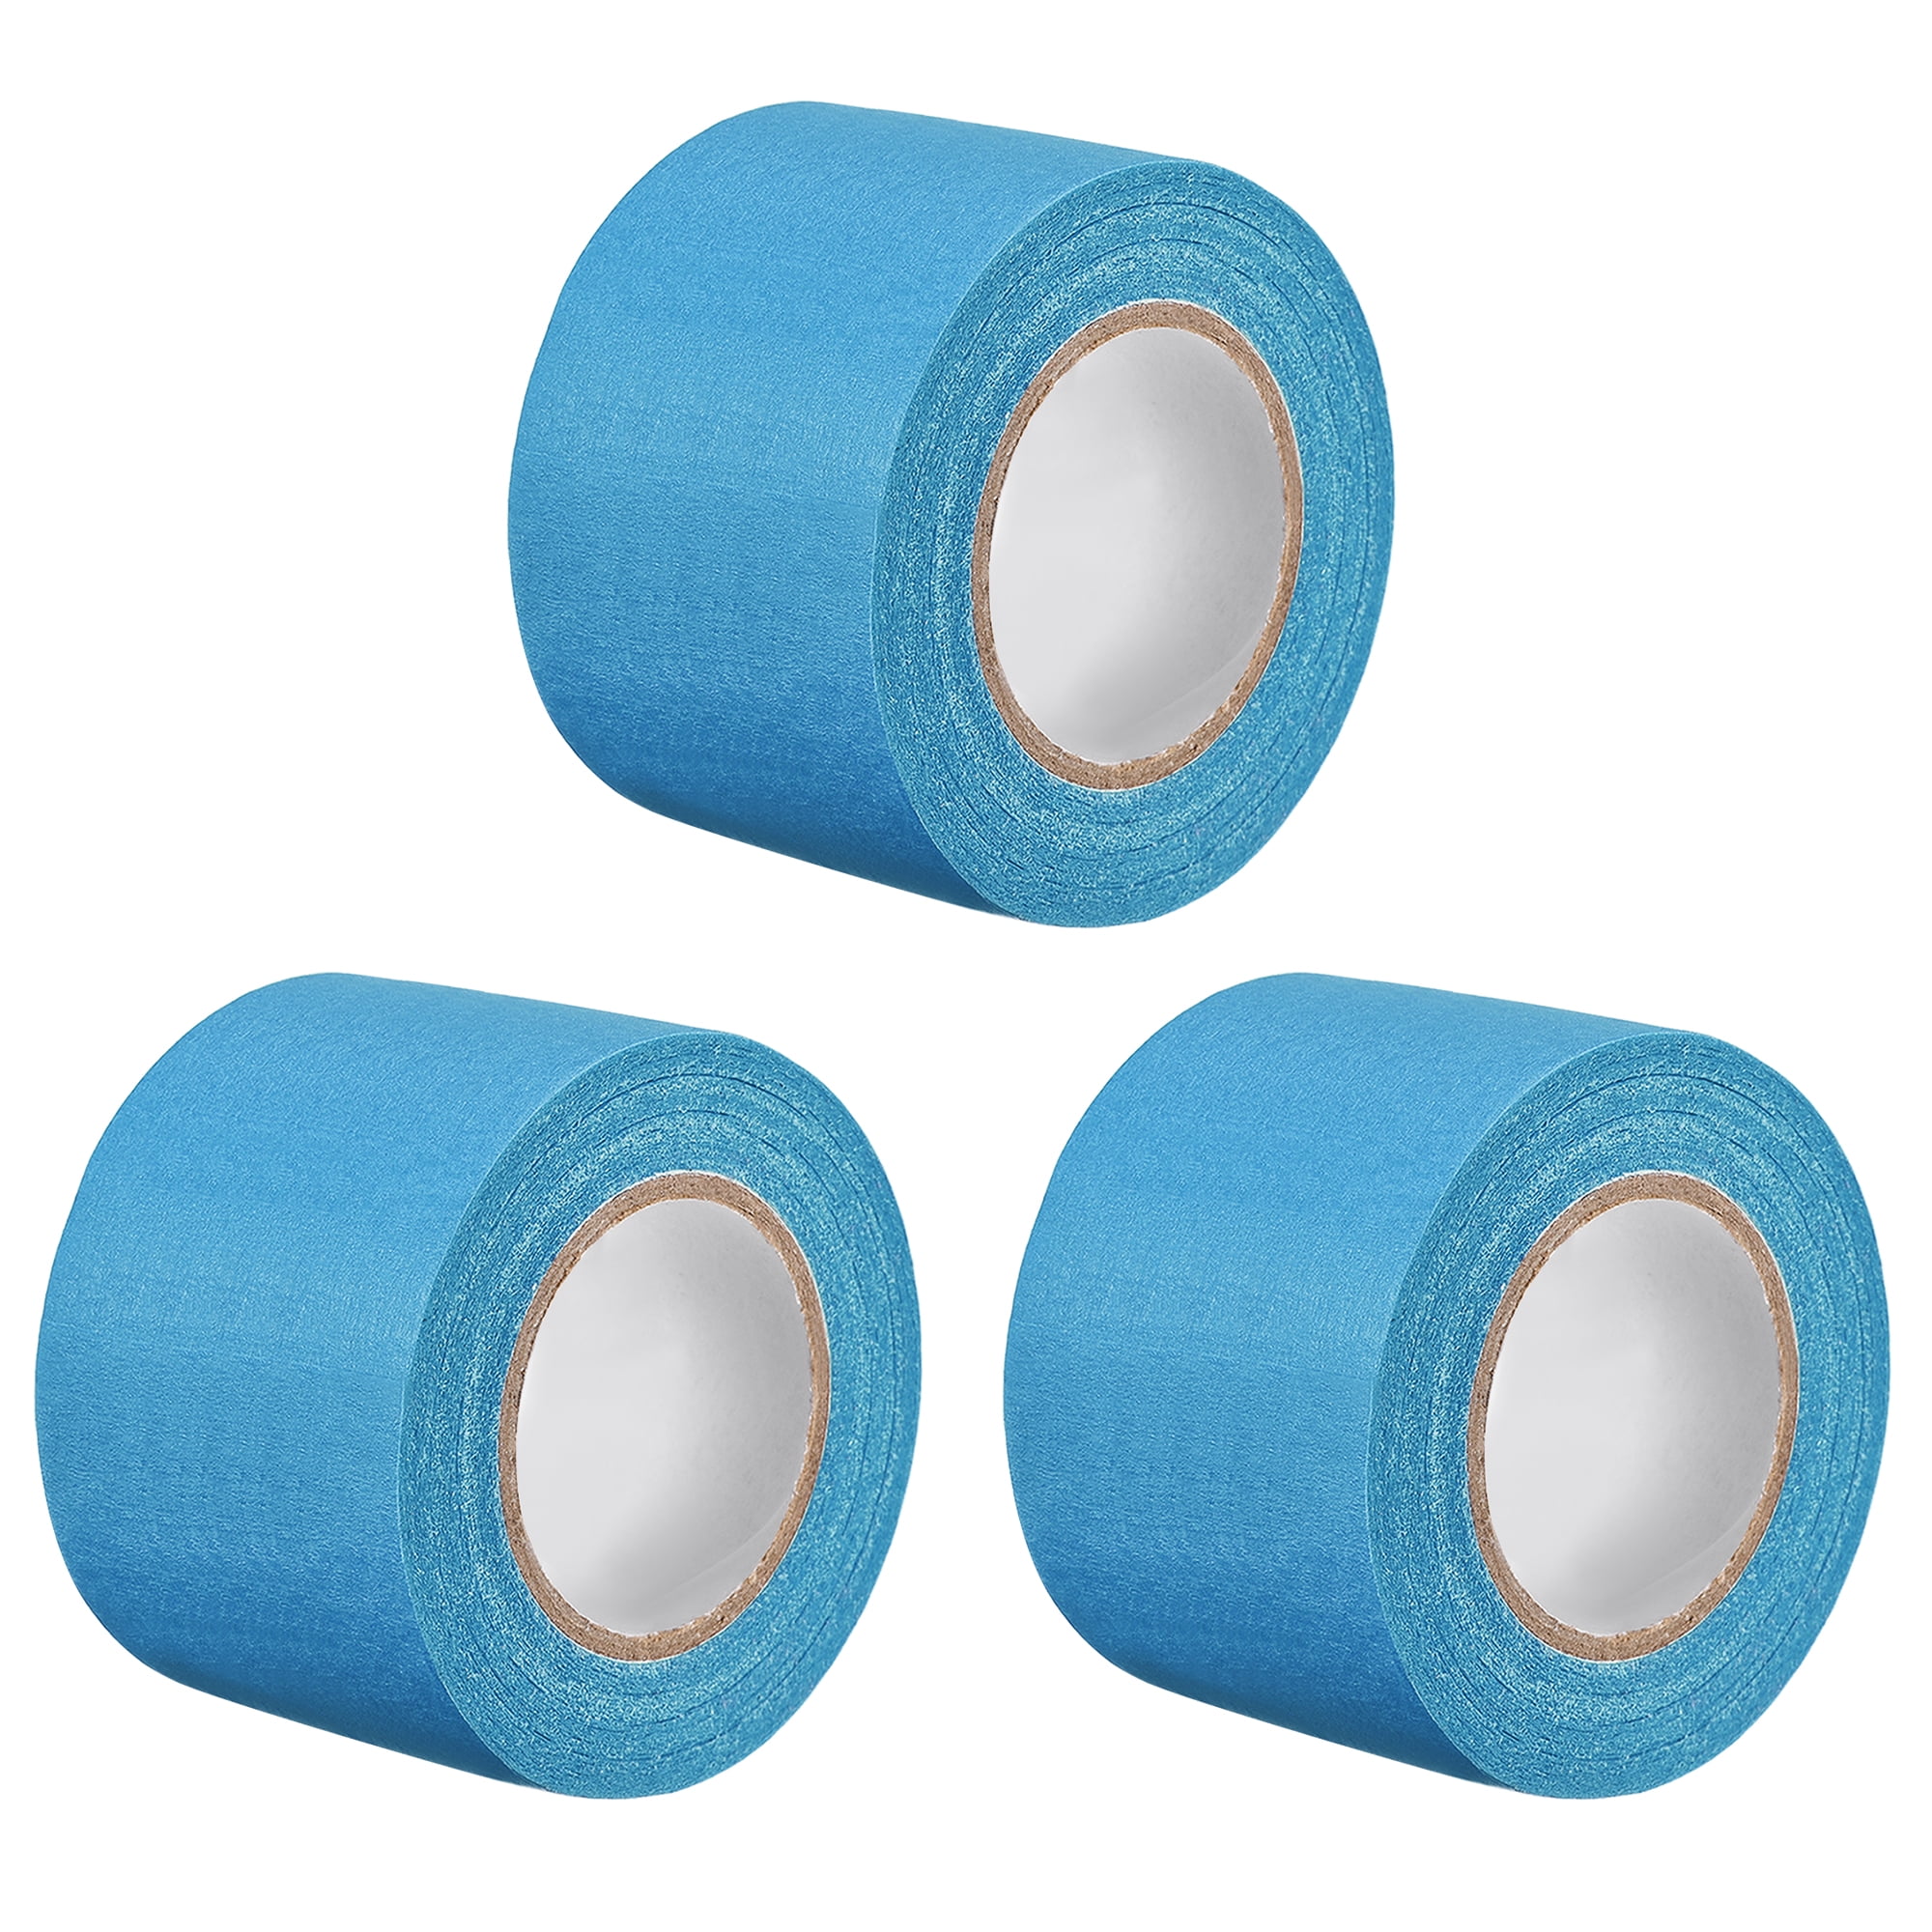 uxcell 50mm 2 inch Wide 20m 21 Yards Masking Tape Painters Tape